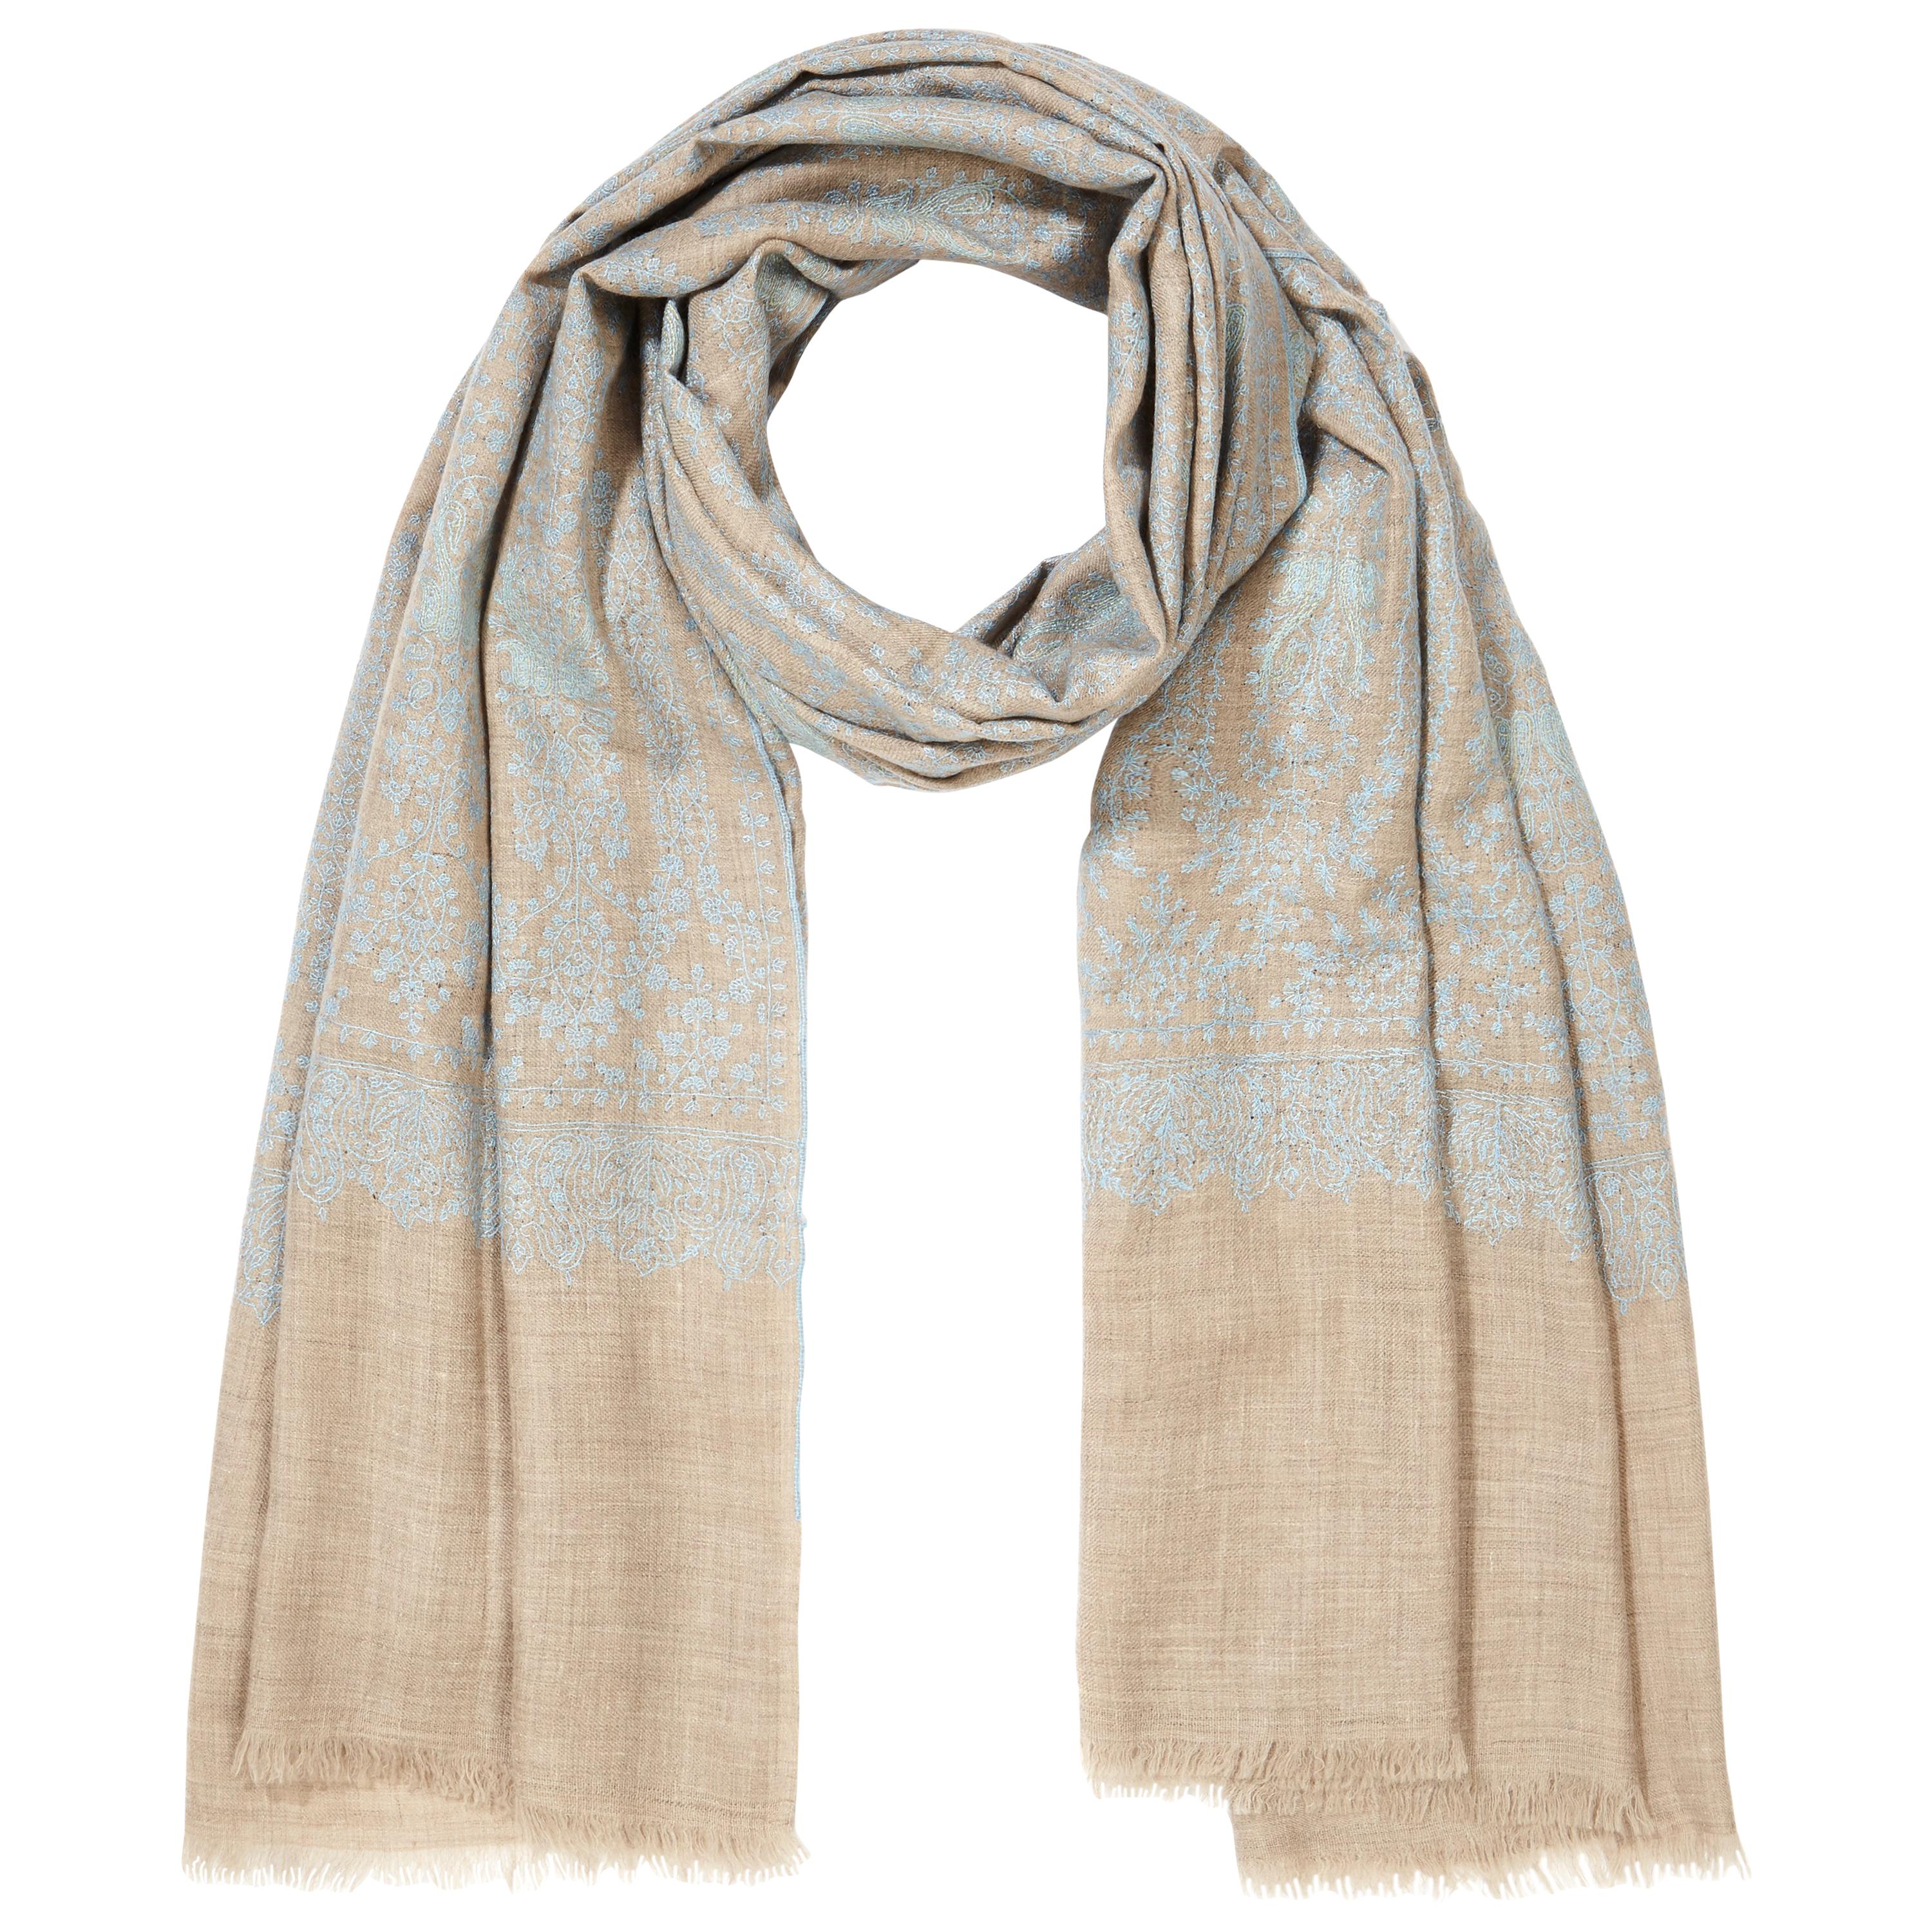 Hand Embroidered Cashmere Scarf in Taupe & Blue Made in Kashmir India -Brand New
The perfect gift for someone special - this shawl is unique and handmade. 

Verheyen London’s shawl is spun from the finest embroidered woven cashmere from Kashmir. 